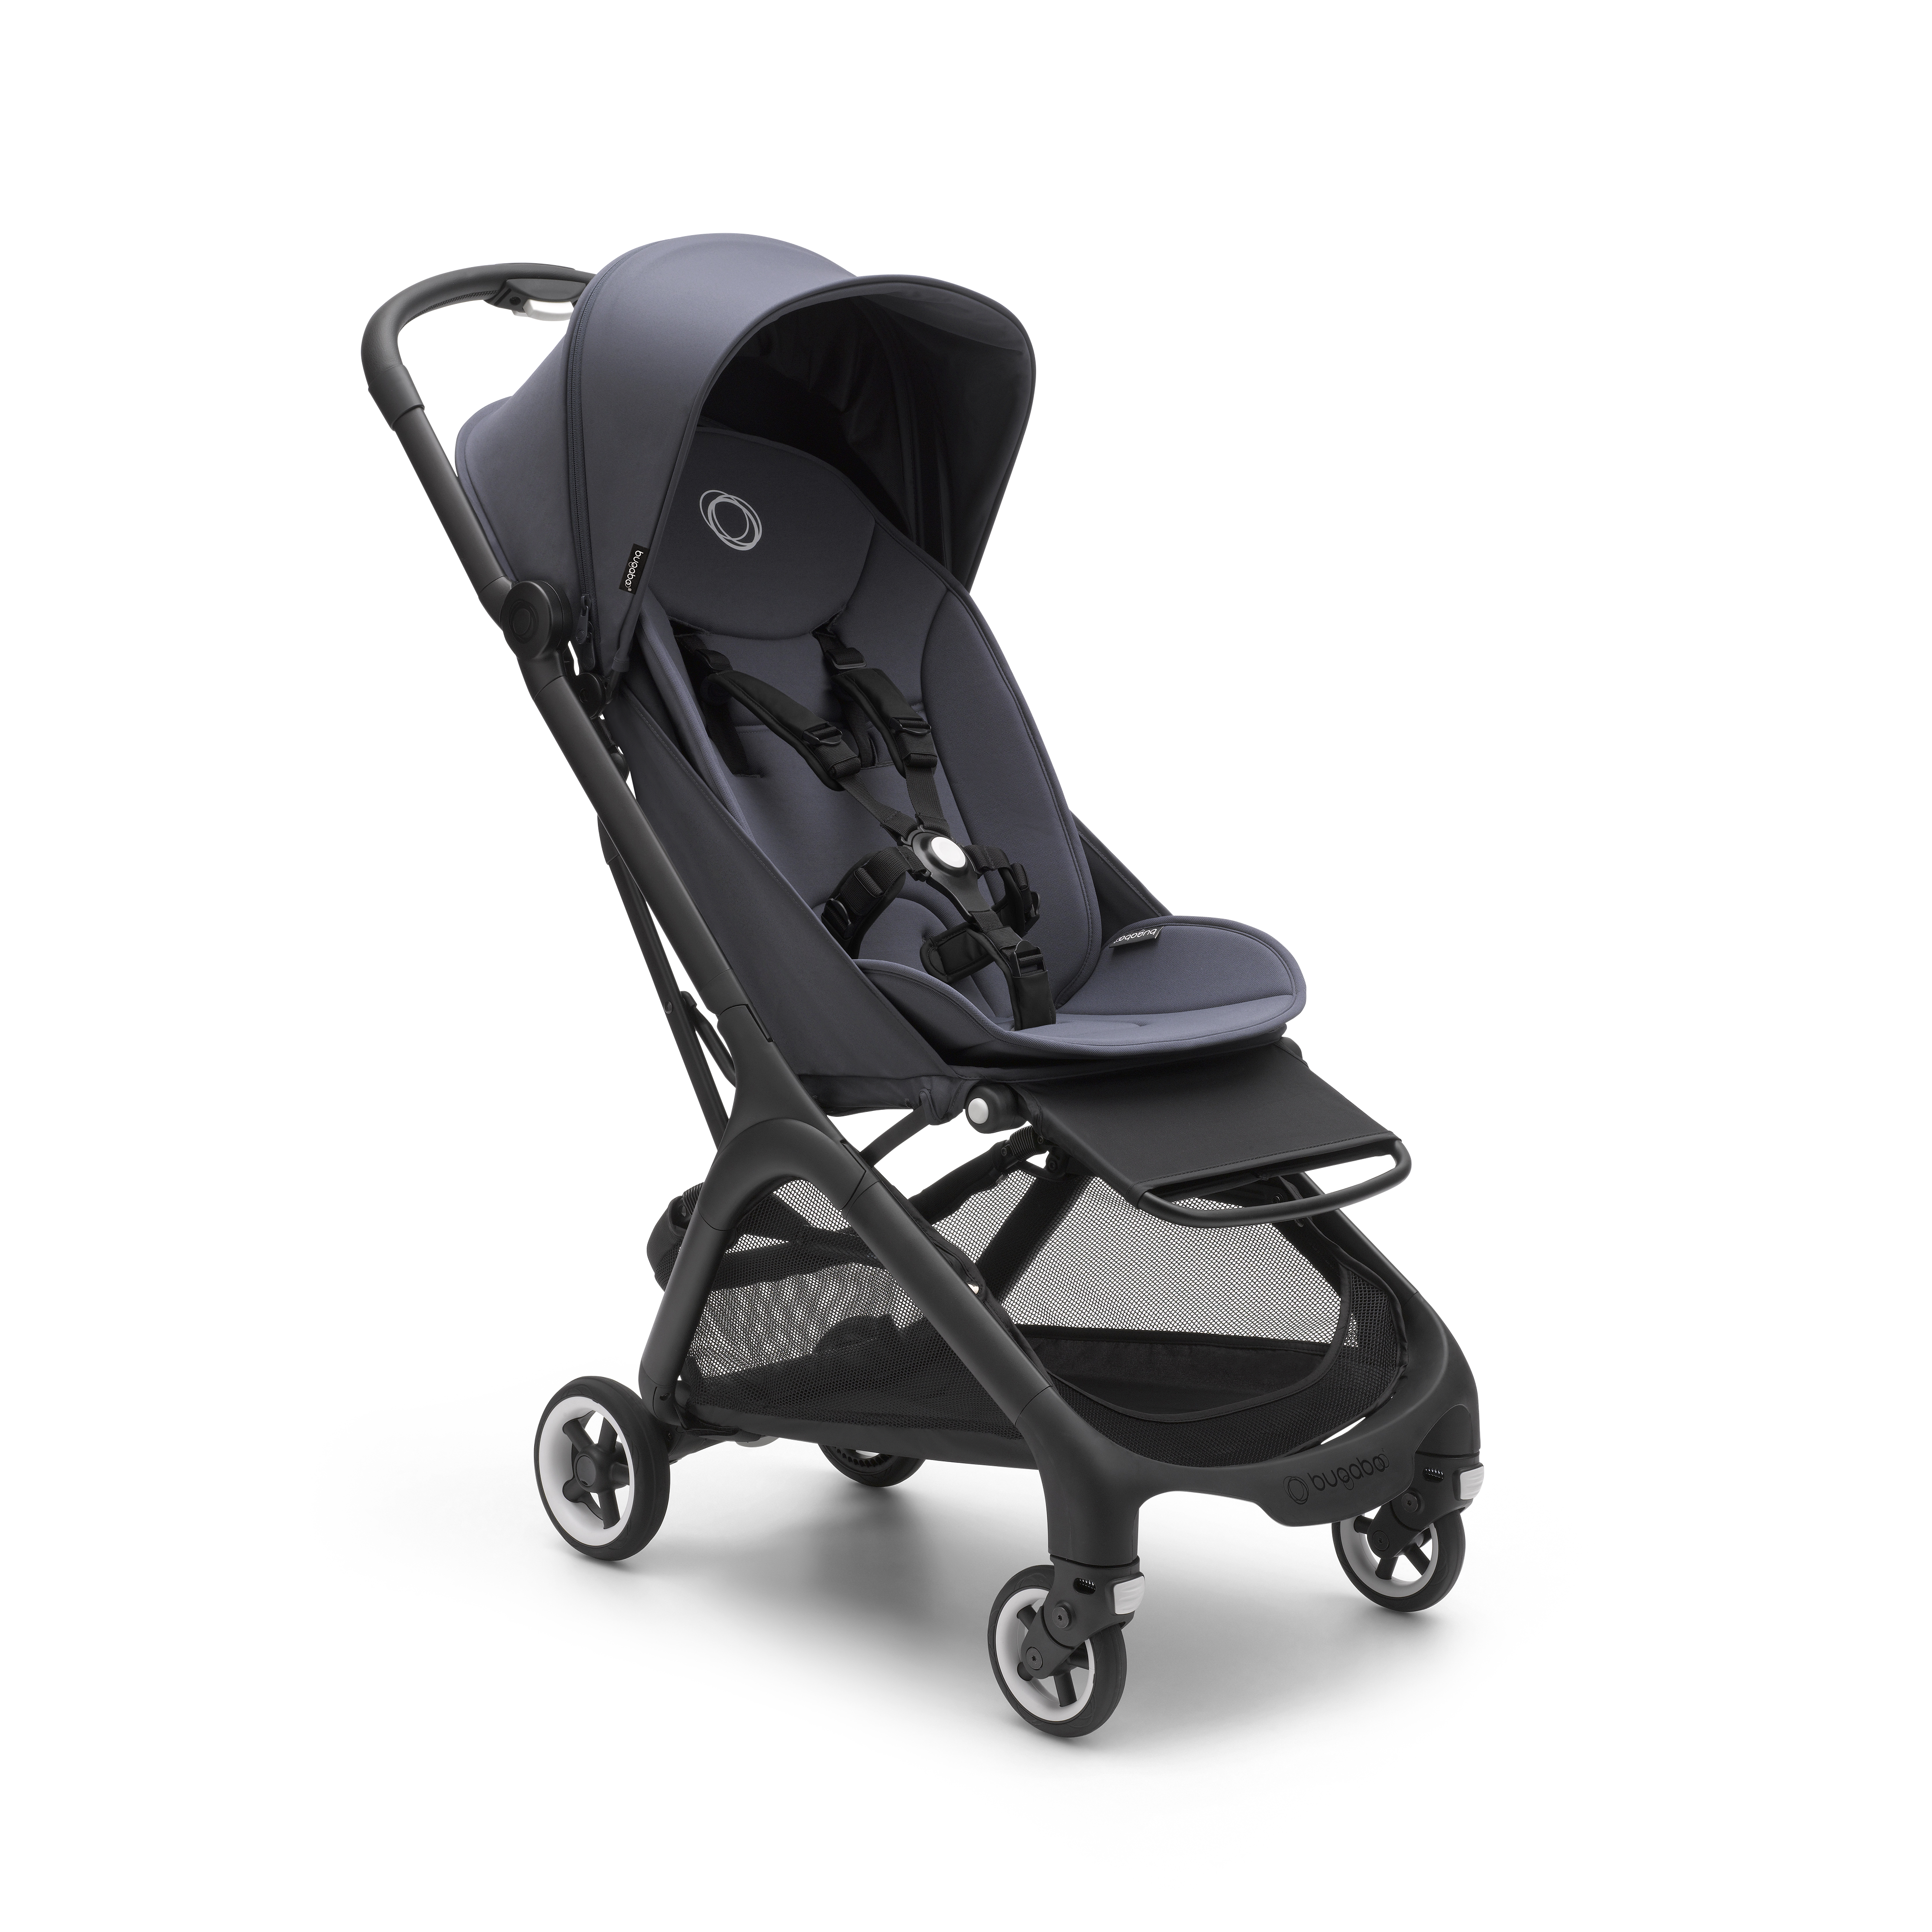 PP Bugaboo Butterfly complete BLACK/STORMY BLUE – STORMY BLUE